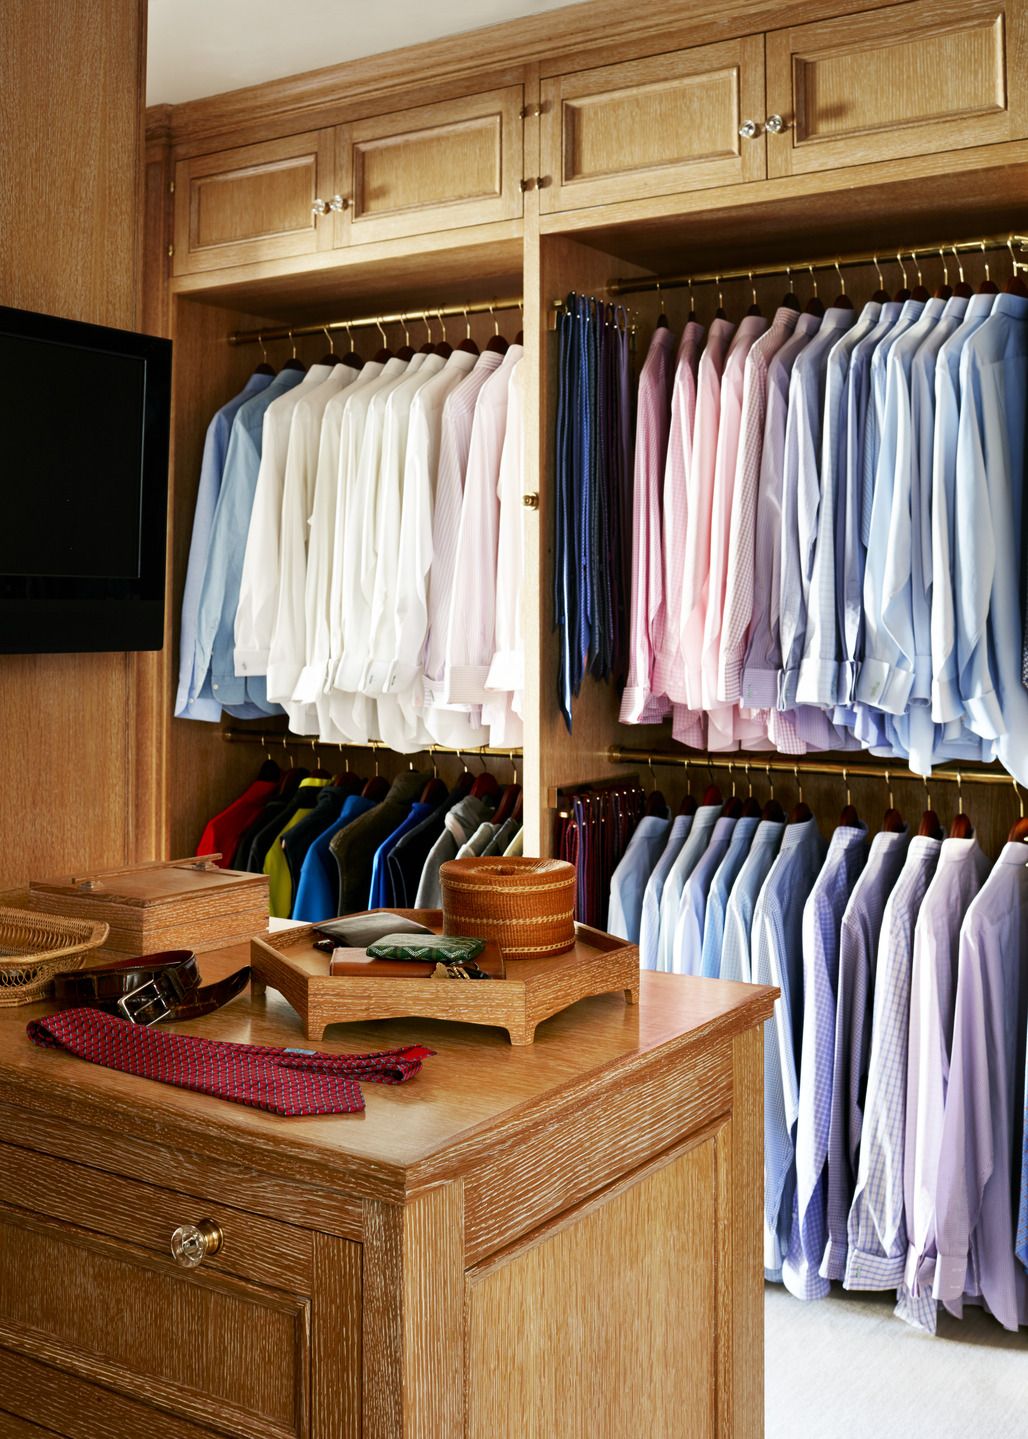 How to Install Wood Closet Organizers 